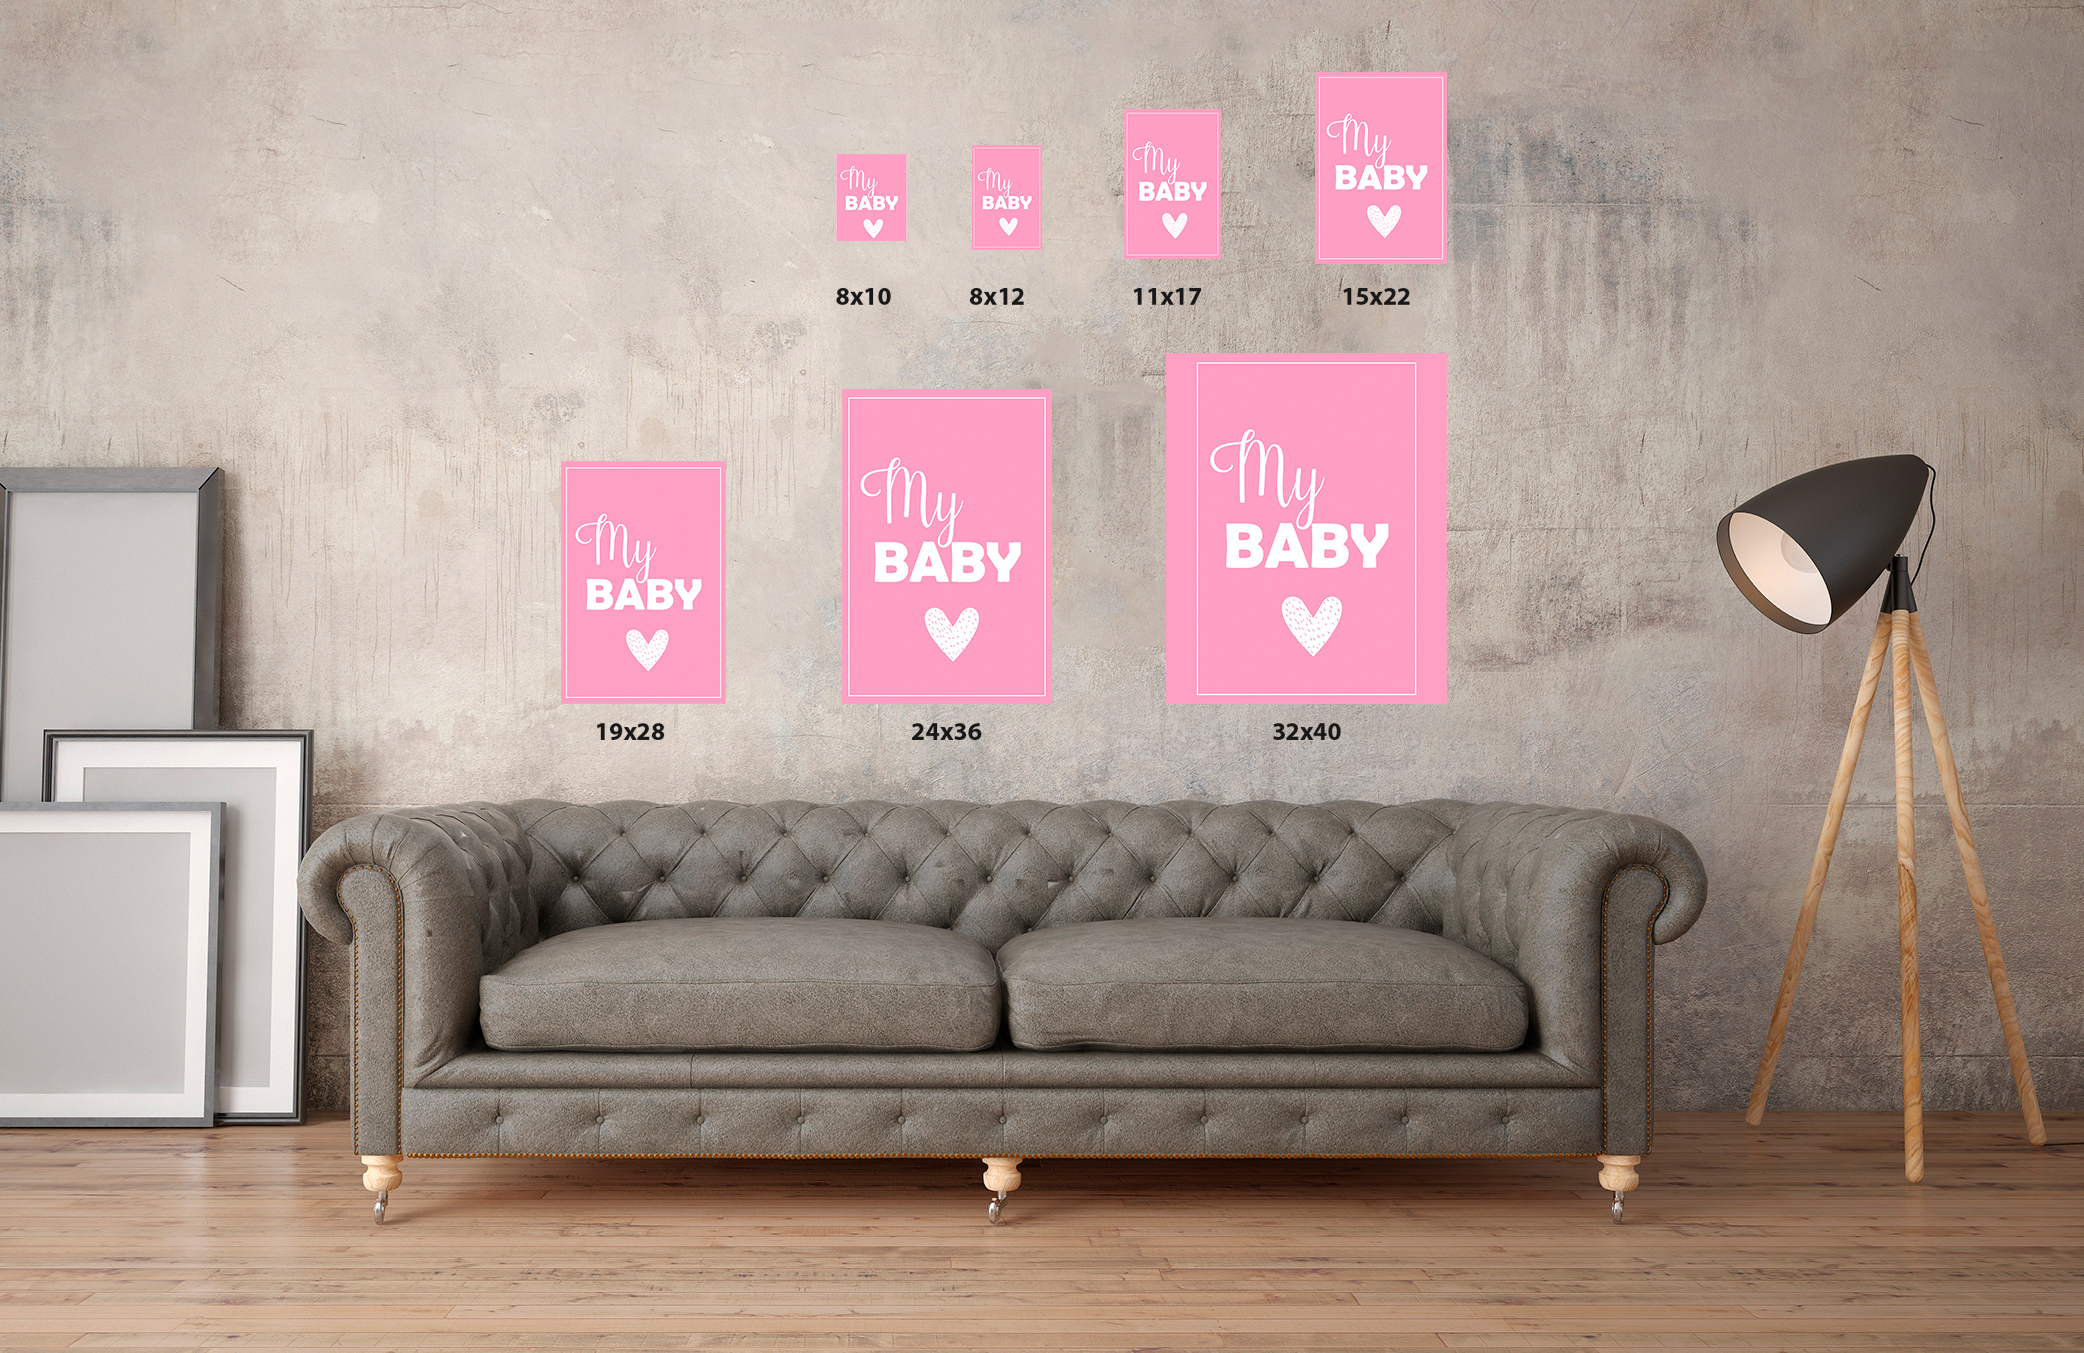 Awkward Styles My Baby Poster Wall Art Kids Room Wall Decor Pink Poster Baby Room Decor Gifts for Kids Baby Girl's Room Printed Art Picture Mother Quotes Decor Girls Play Room Wall Decor Pink Poster - image 3 of 3